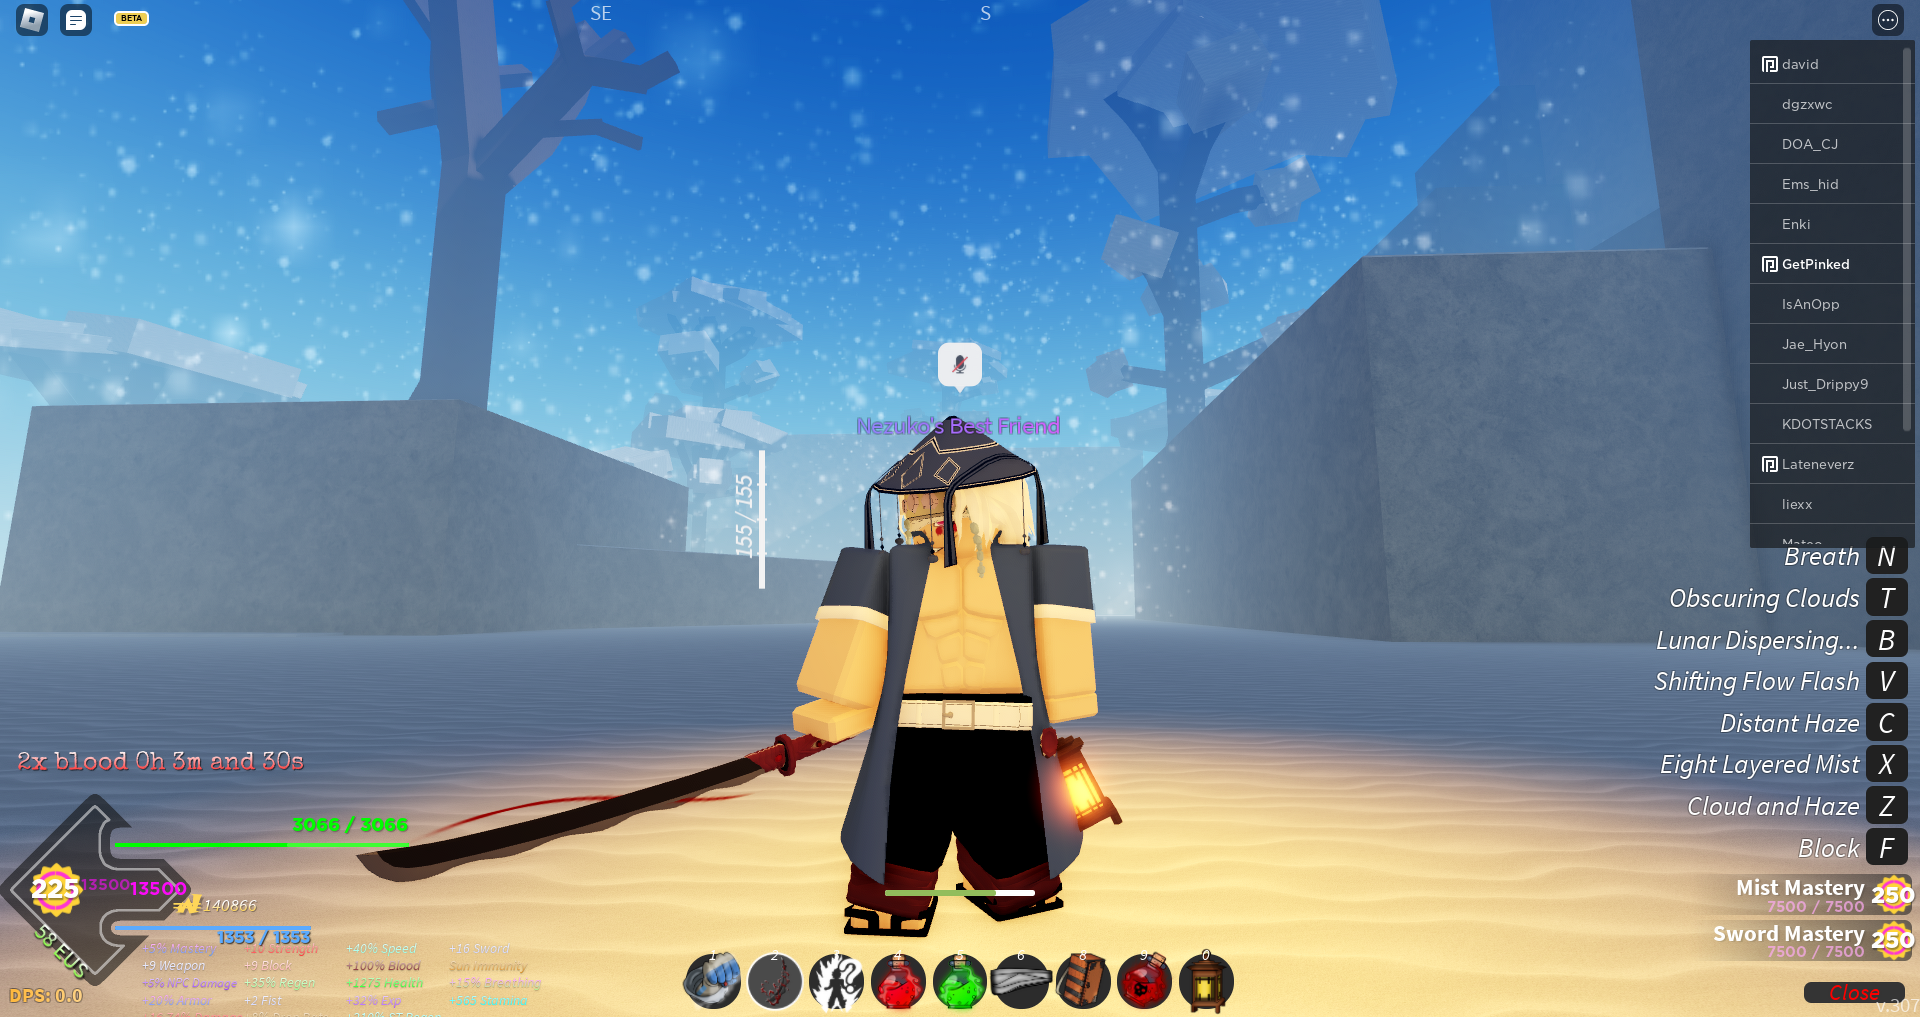 Spending 20,000 ROBUX To Get 0.1% SUPREME Clan Race Specs In Project Slayers  (Release SOON) 